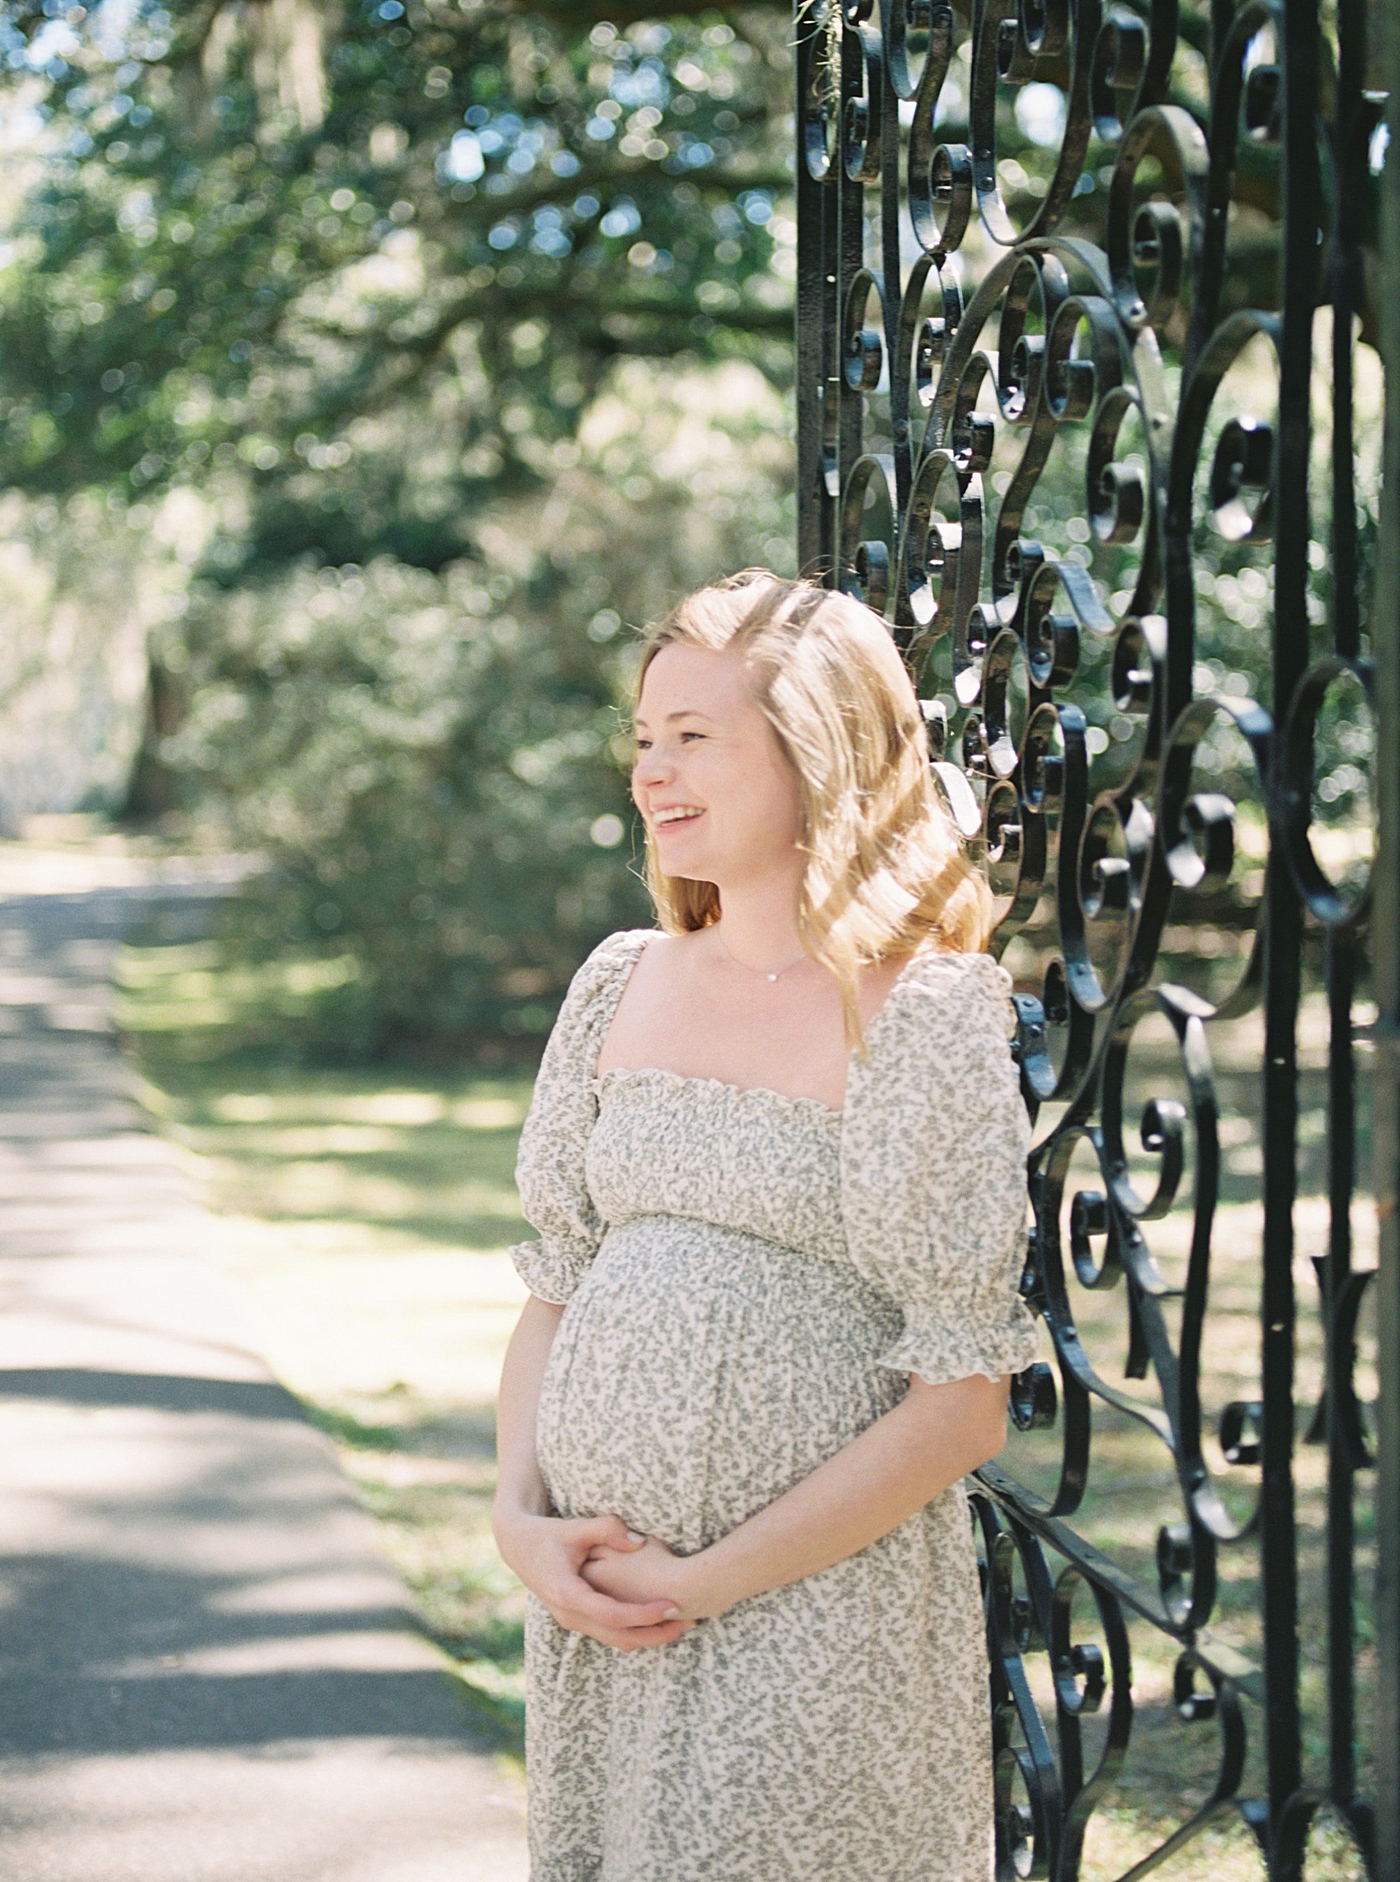 during their Maternity Session at Charlestowne Landing| Image by Caitlyn Motycka Photography